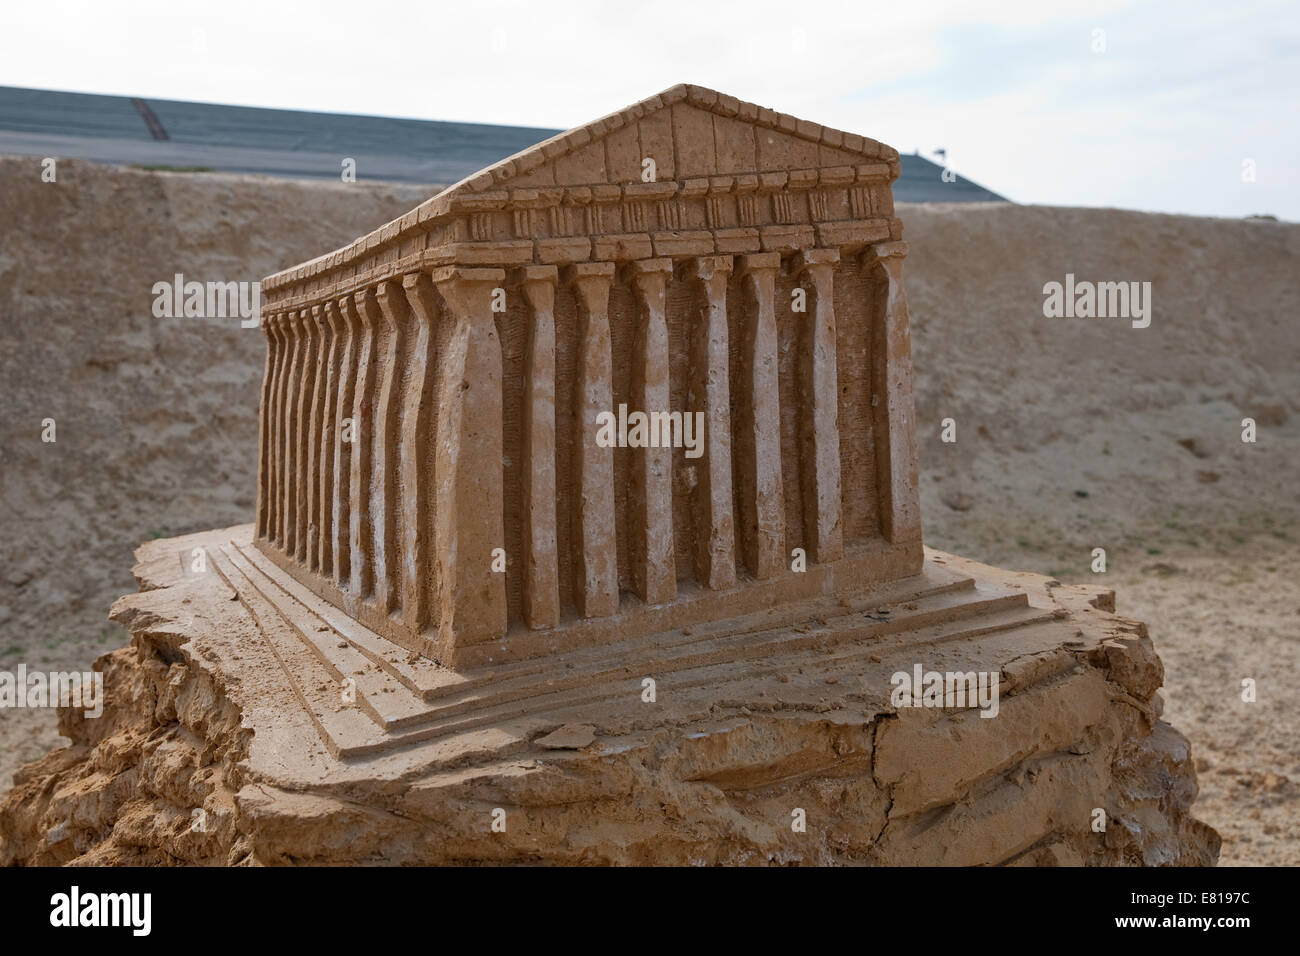 The Parthenon in Greece on display at the Sand Sculpture festival in Brighton Stock Photo